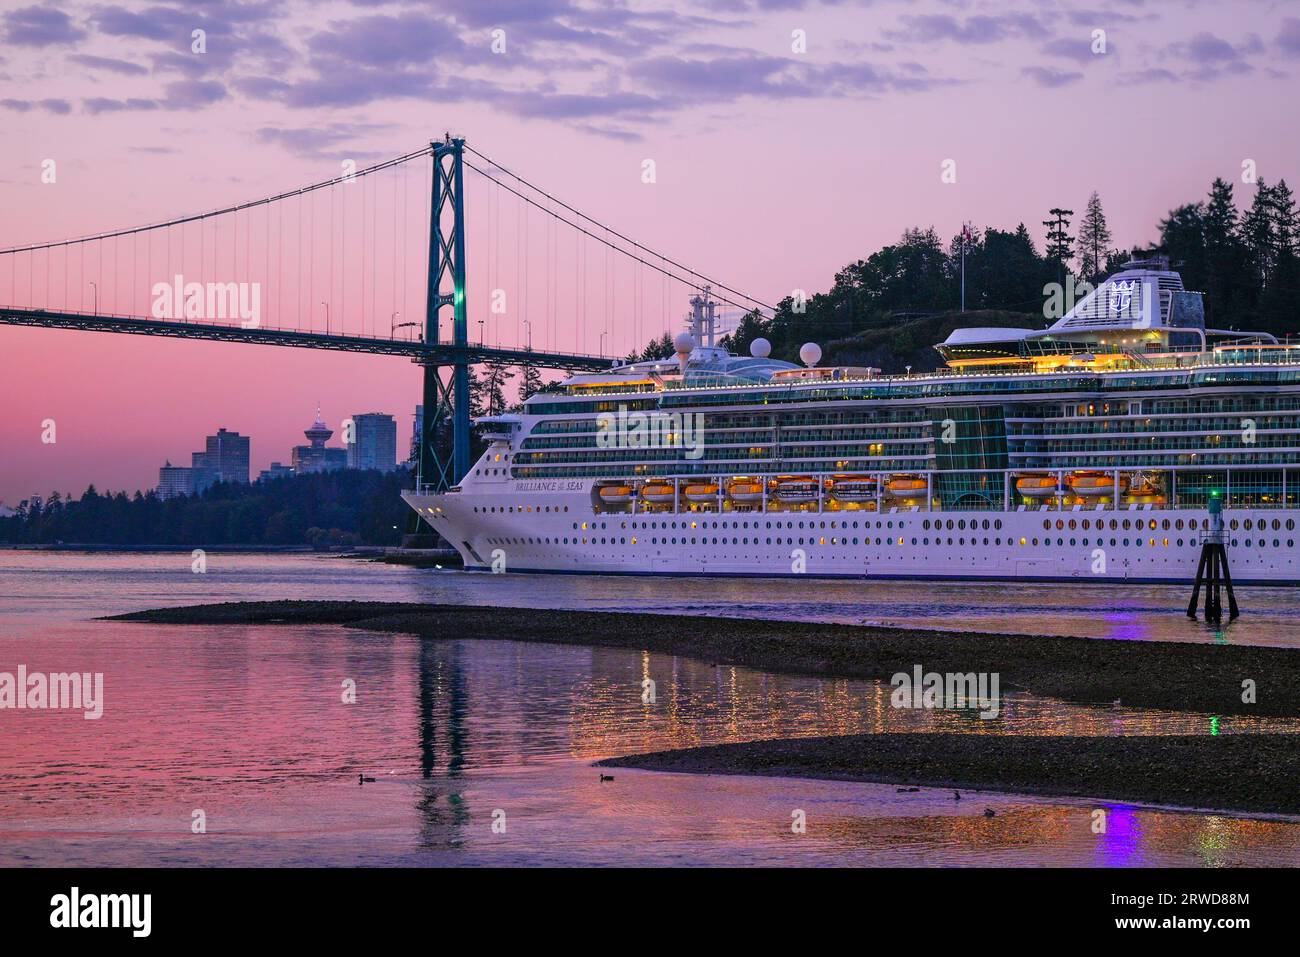 Royal Caribbean line, Cruise ship, Brilliance of the Seas, enters Vancouver harbour, Vancouver, British Columbia, Canada Stock Photo